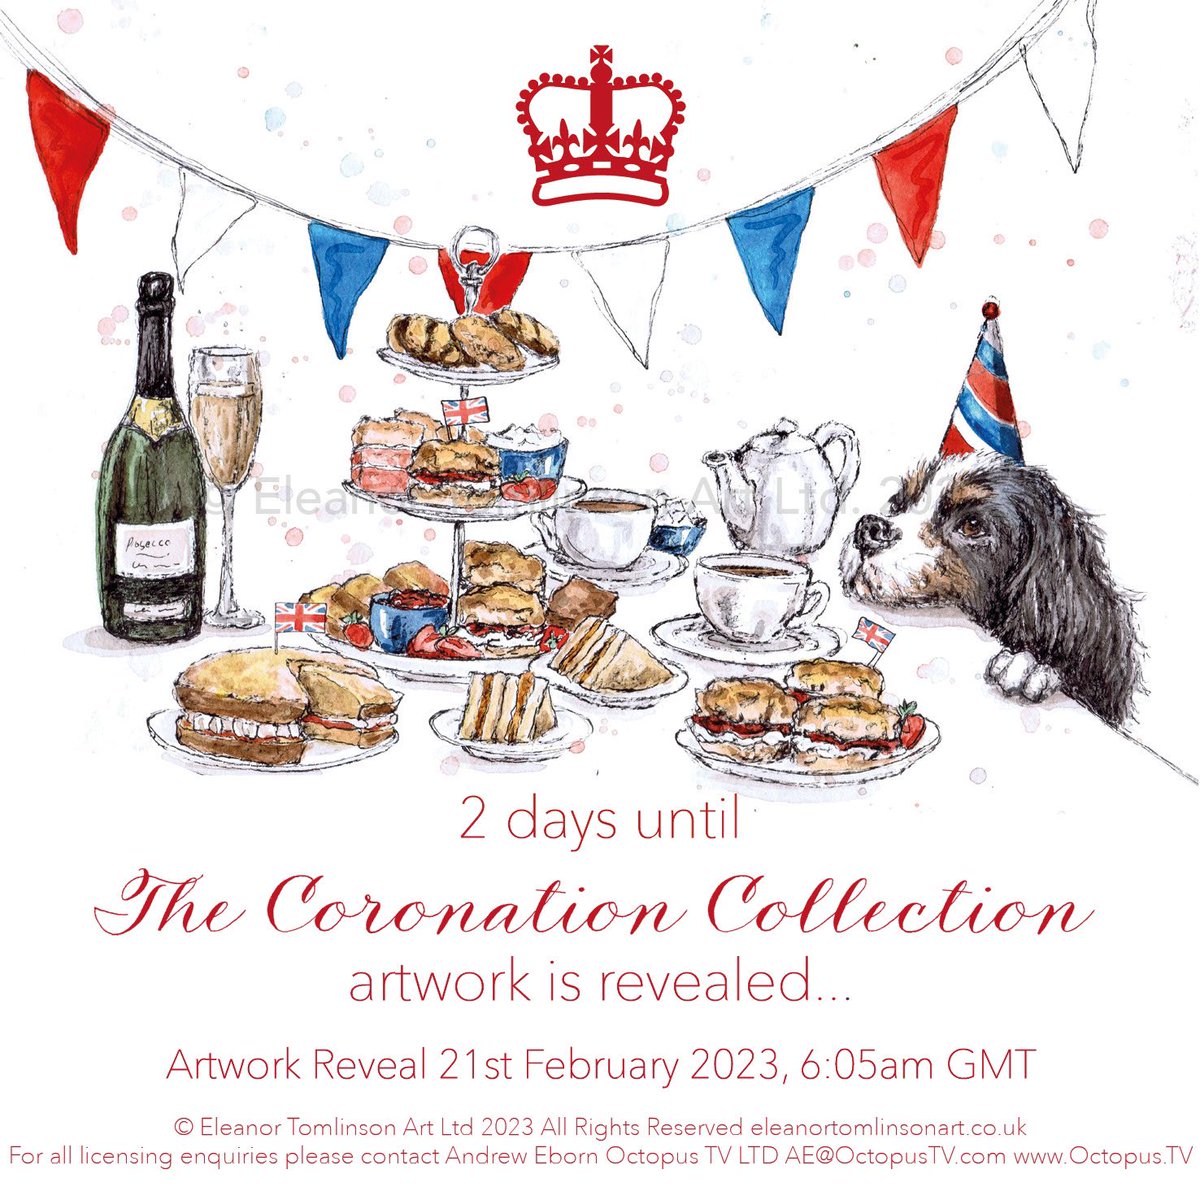 Who’s planning a street party or garden get together this summer? 👑

Coming soon! 

#coronation #coronationartwork #kingcharlesiii #streetparty #teaparty #eleanortomlinson #eleanortomlinsonart #kingcharlescavalier #eleanortomlinsonartist #afternoontea